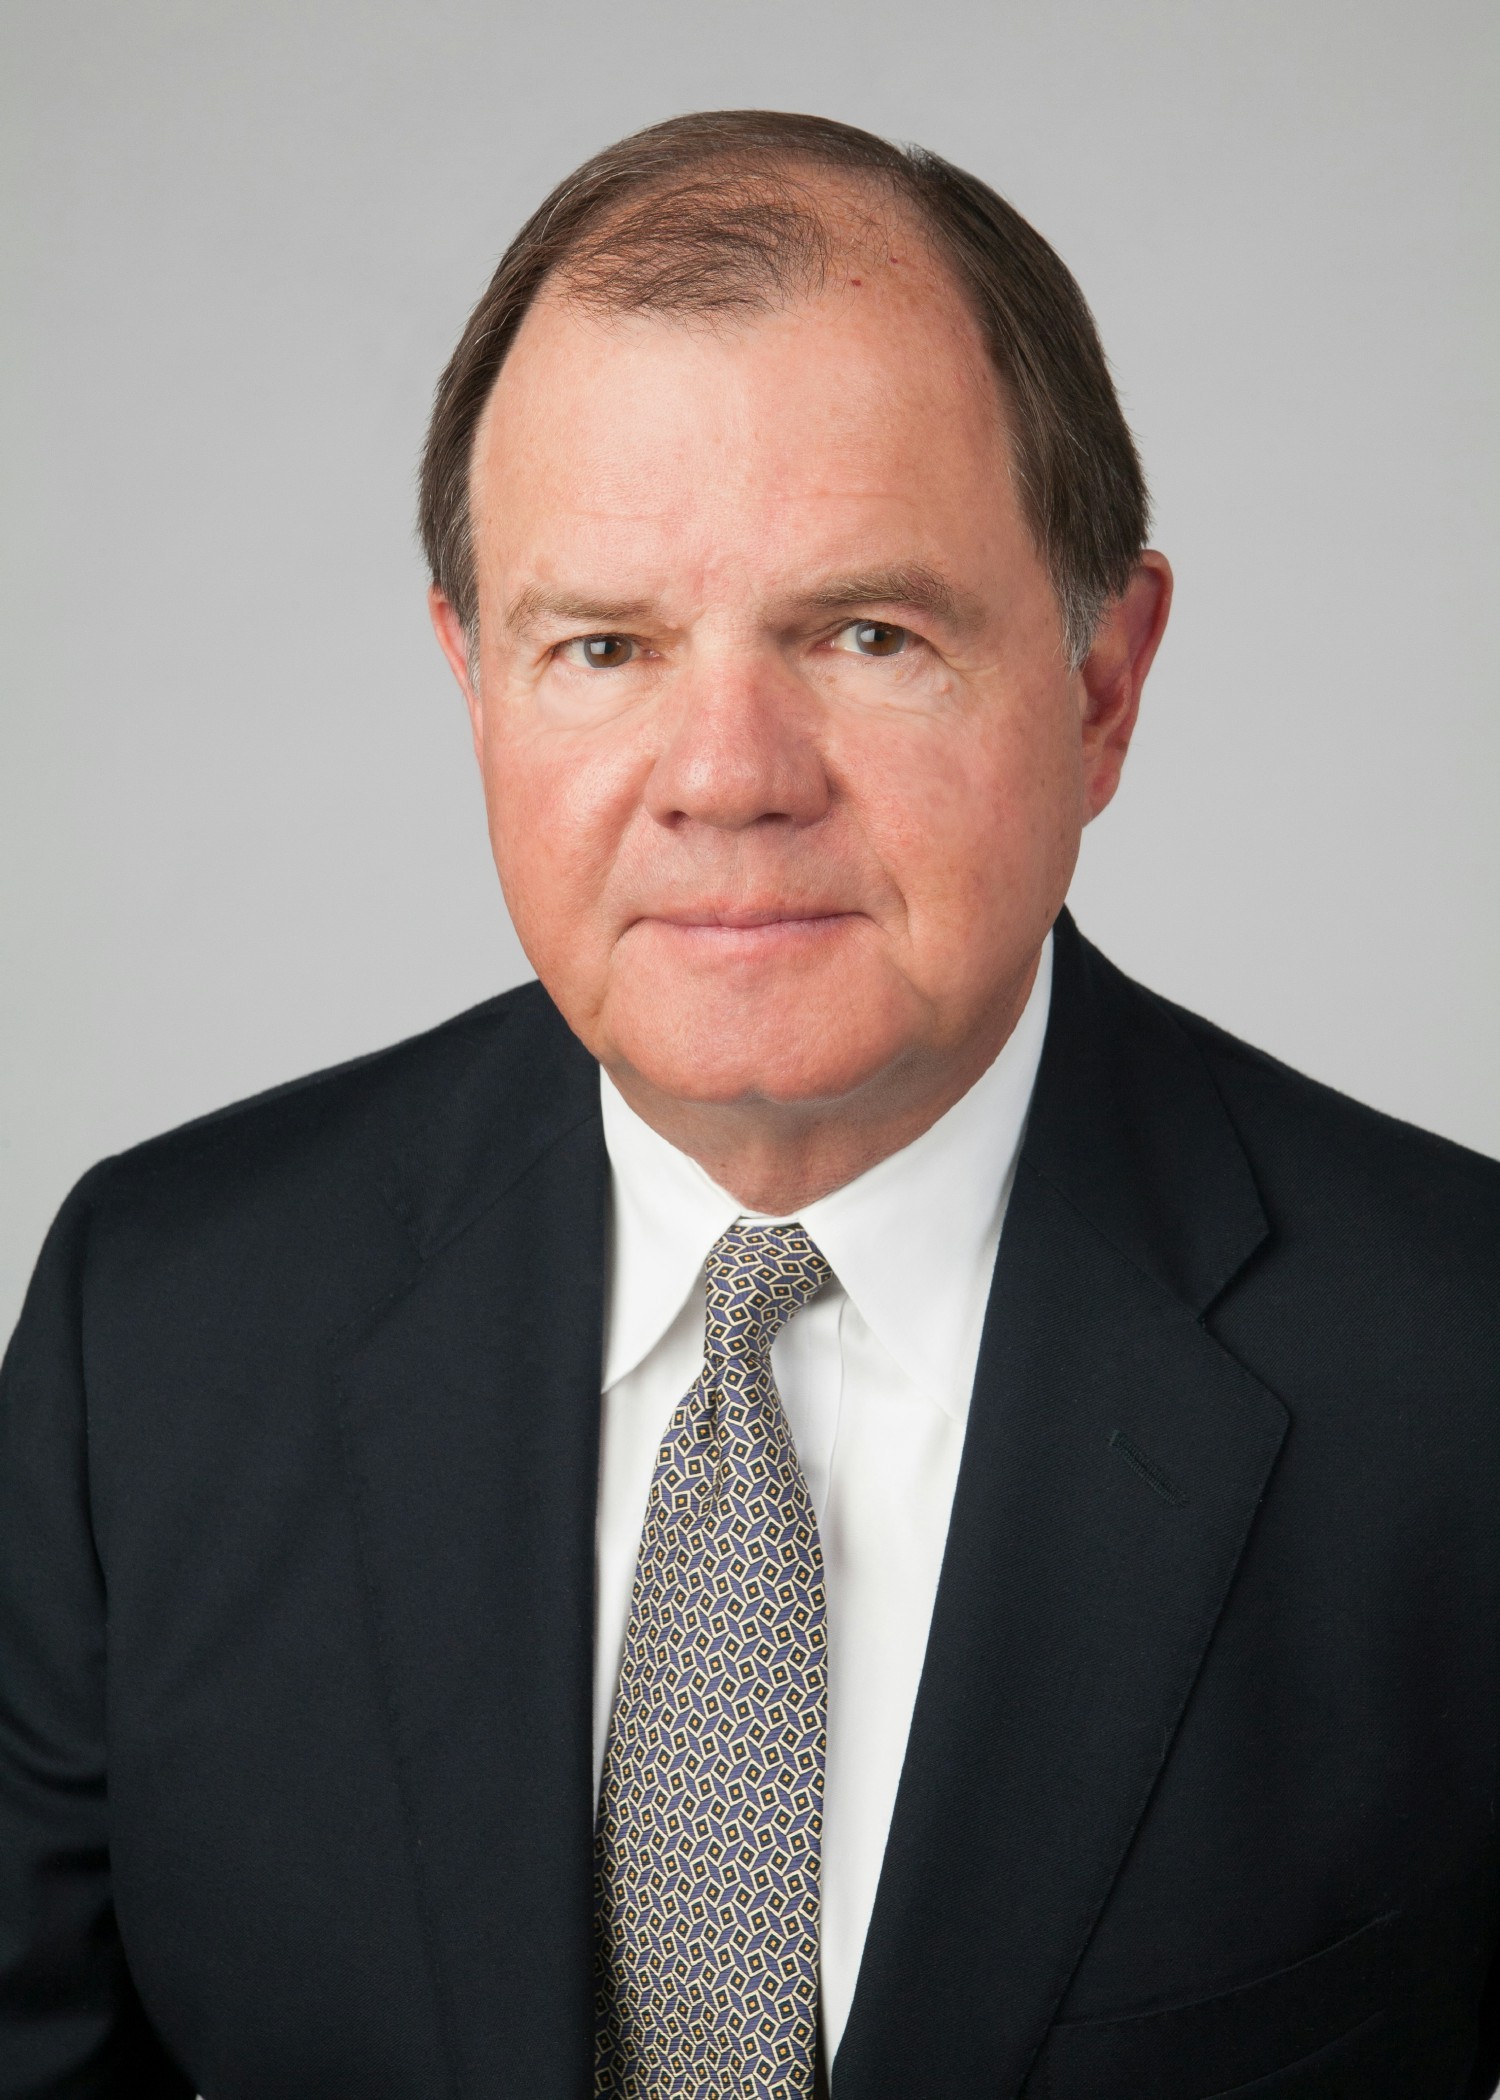 CEO and Co-Founder Rod Sanders